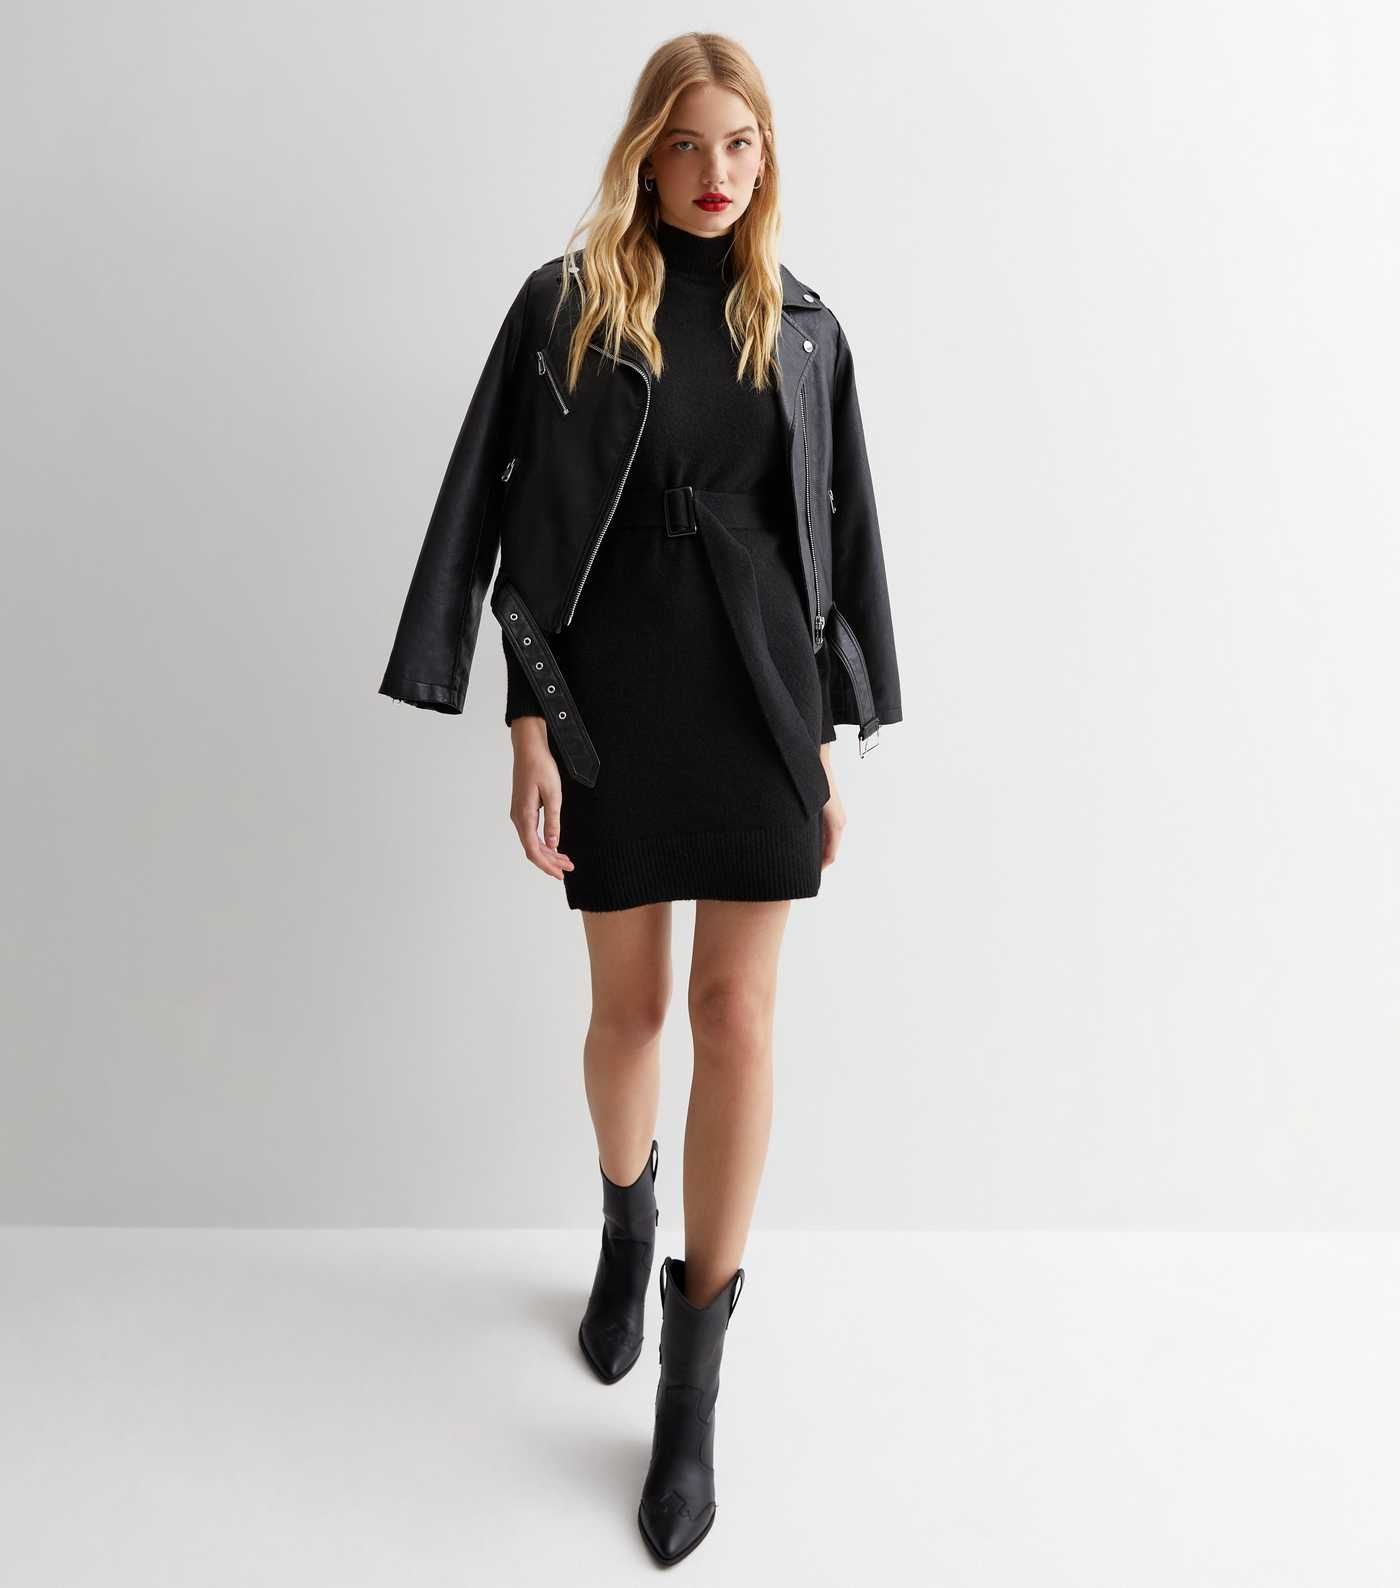 Black High Neck Belted Mini Dress
						
						Add to Saved Items
						Remove from Saved Items | New Look (UK)